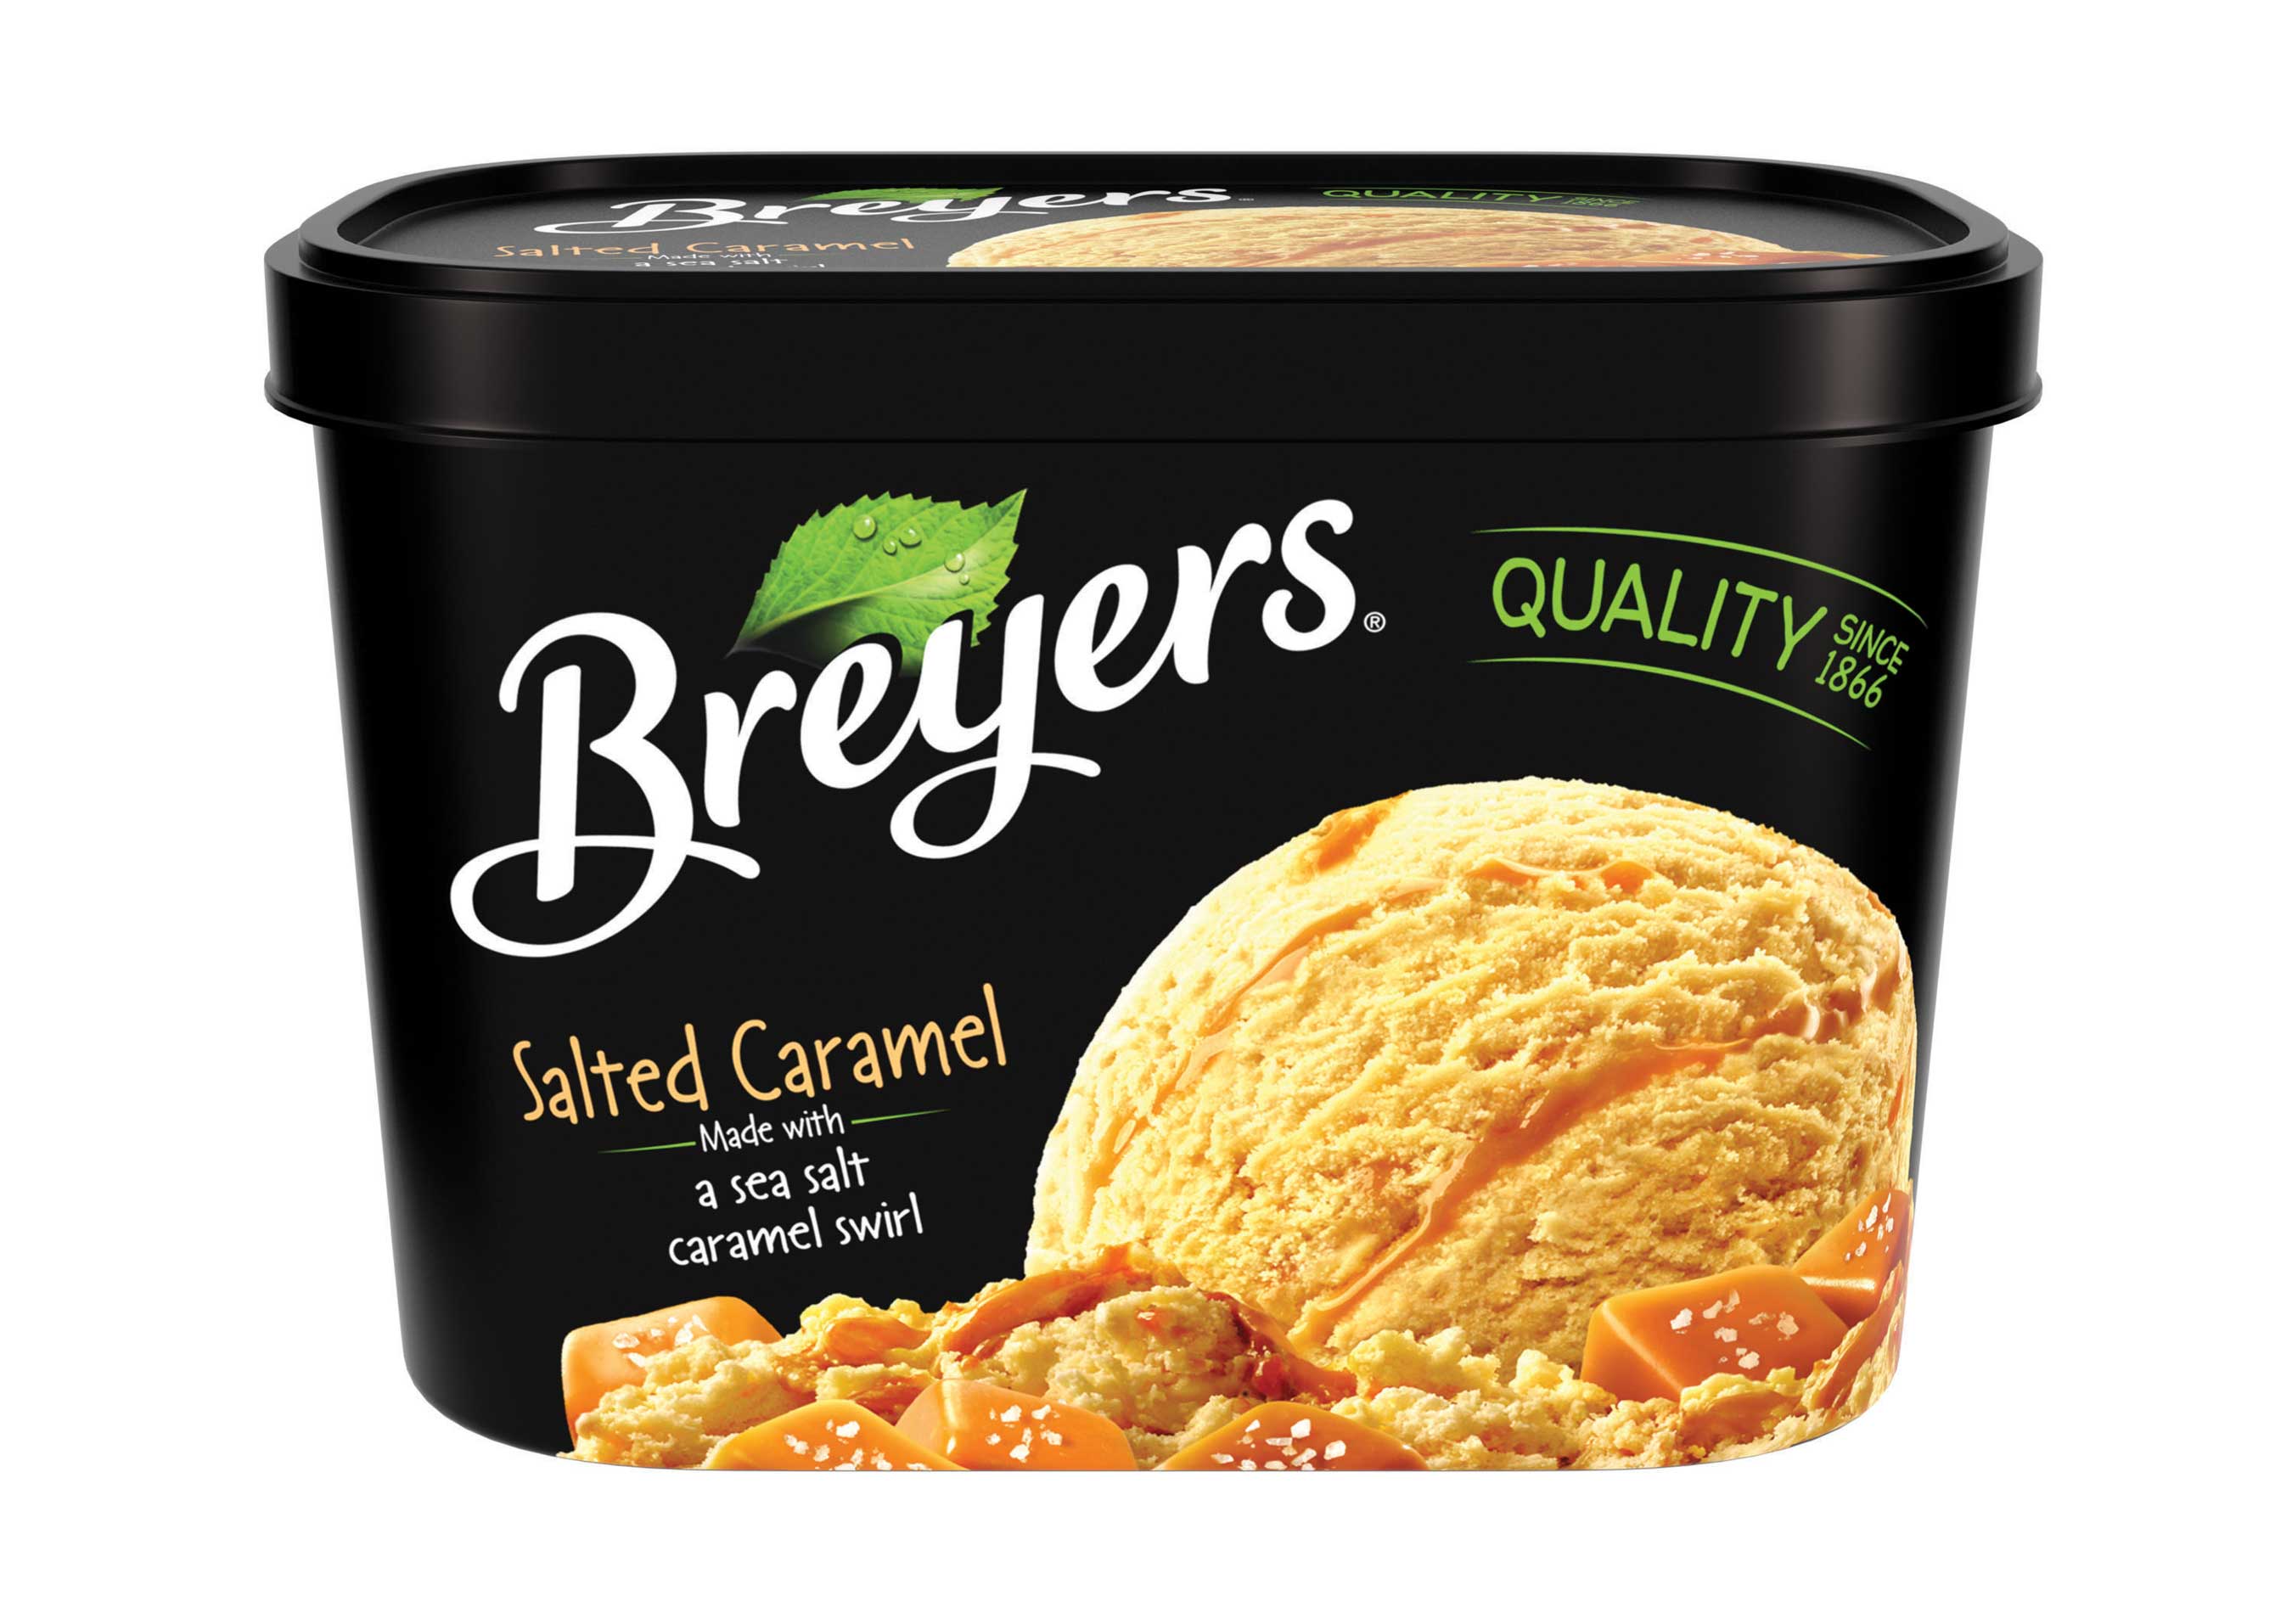 16 Mouthwatering New Frozen Treats For 2015 From Unilever